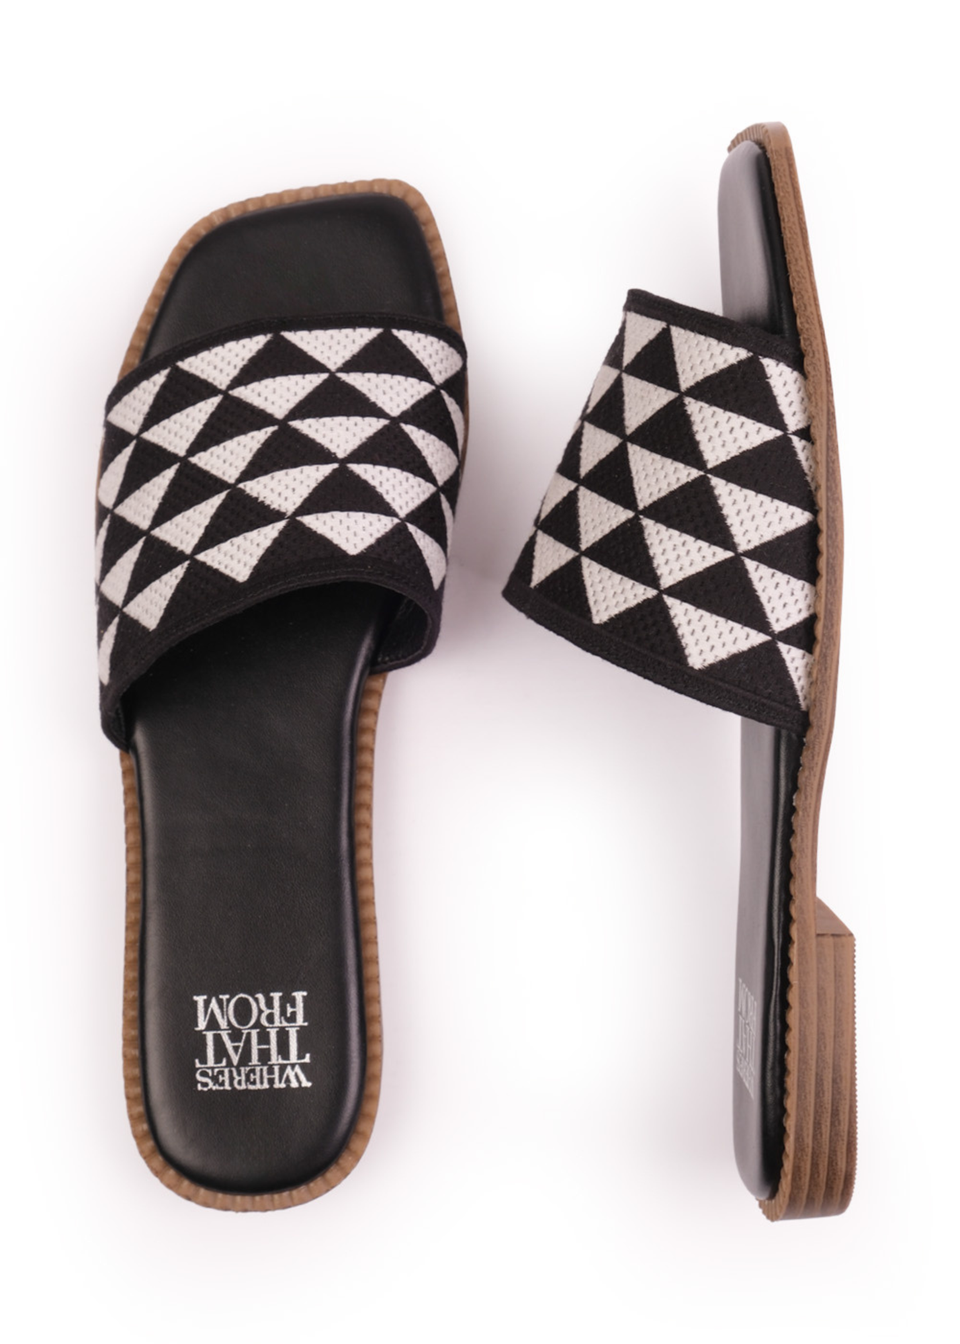 Where's That From Black Pu Sycamore Flat Sandals